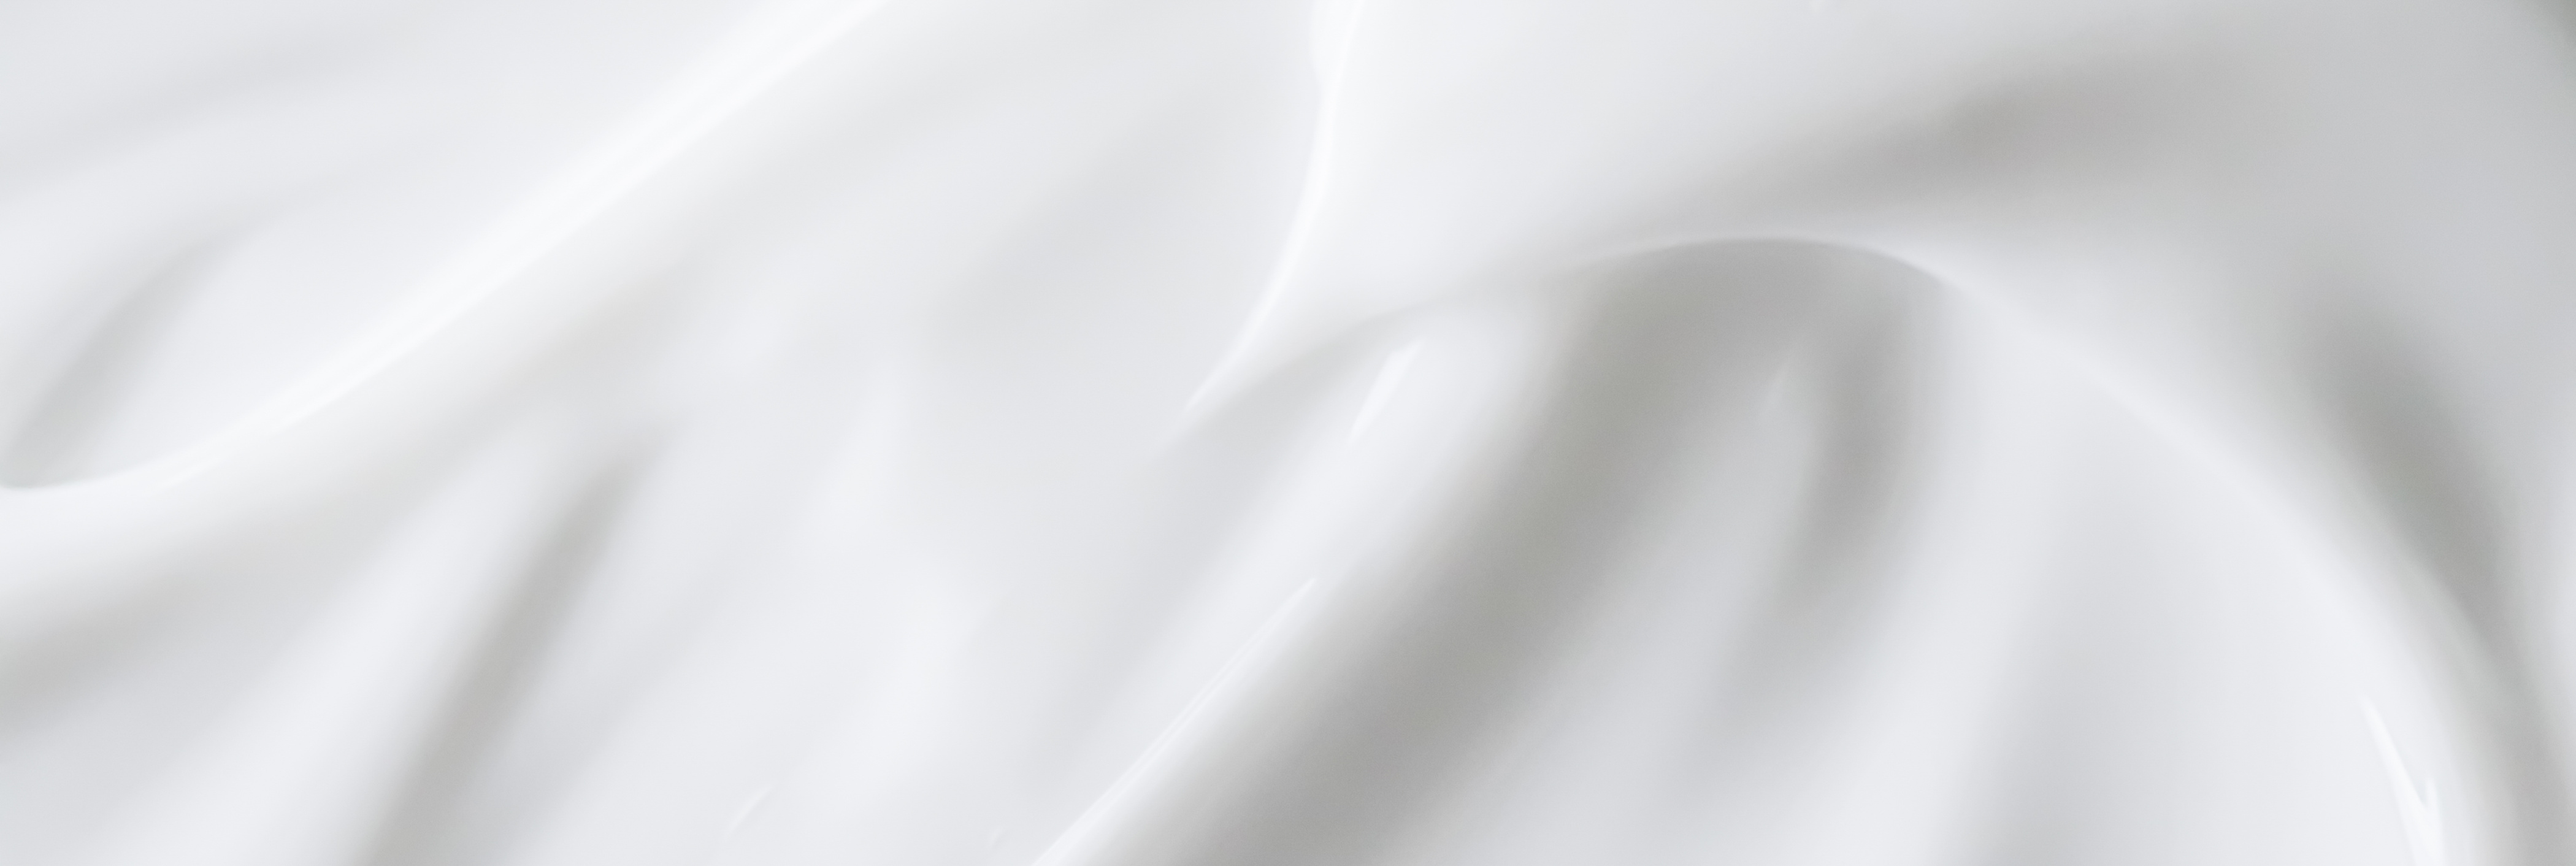 Pure White Cream Texture as Abstract Background, Food Substance or Organic Cosmetic